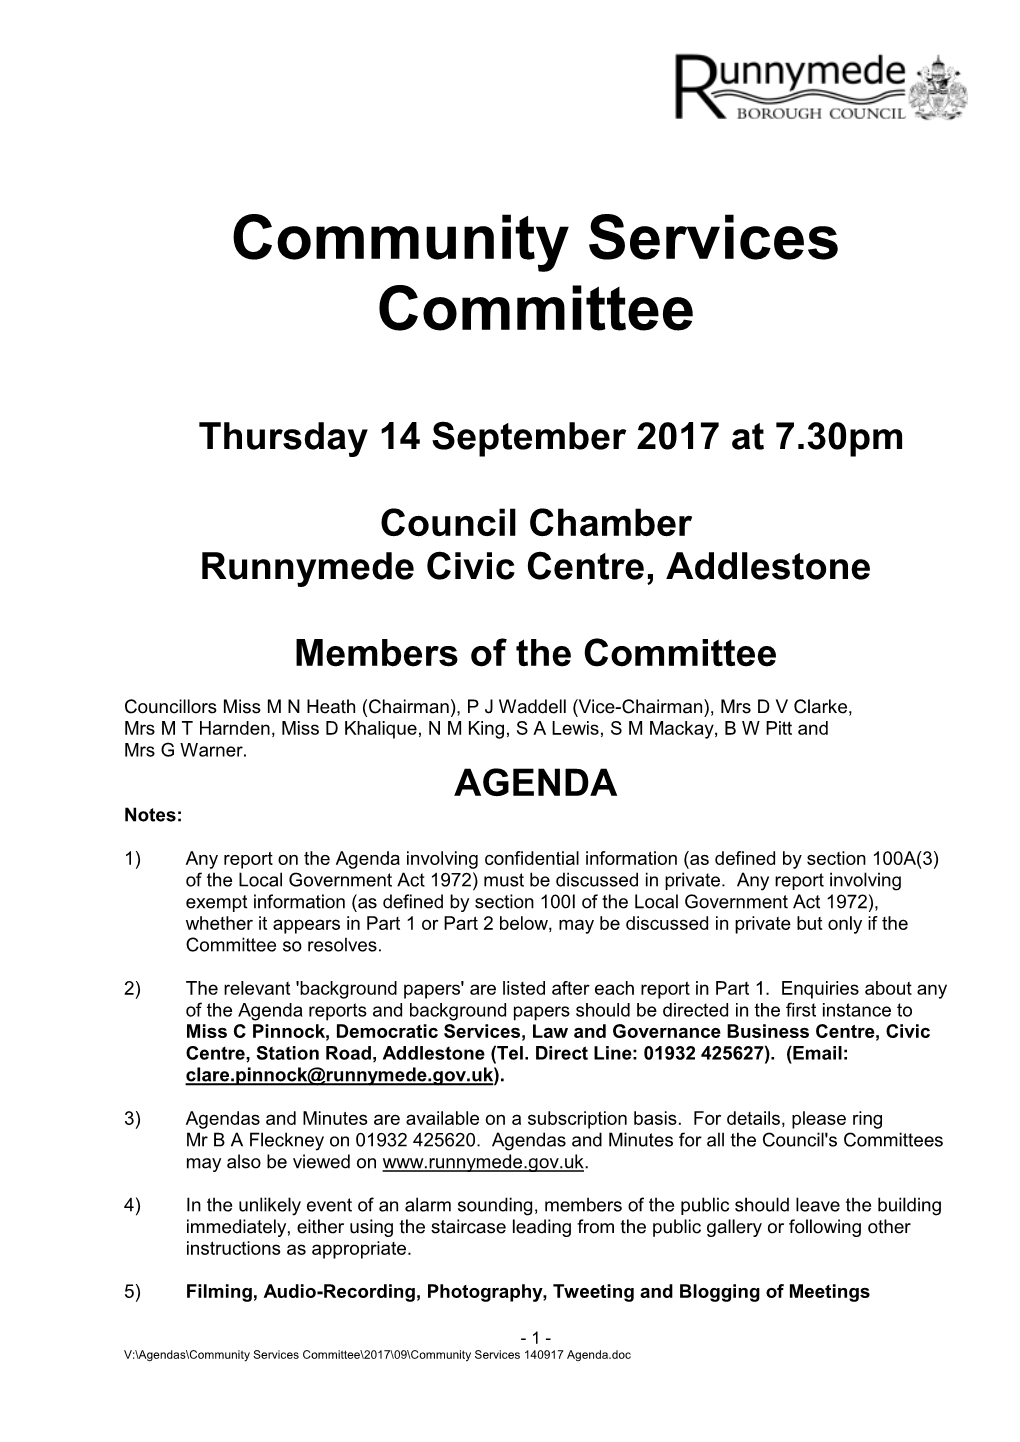 Community Services Committee Agenda 14 September 2017